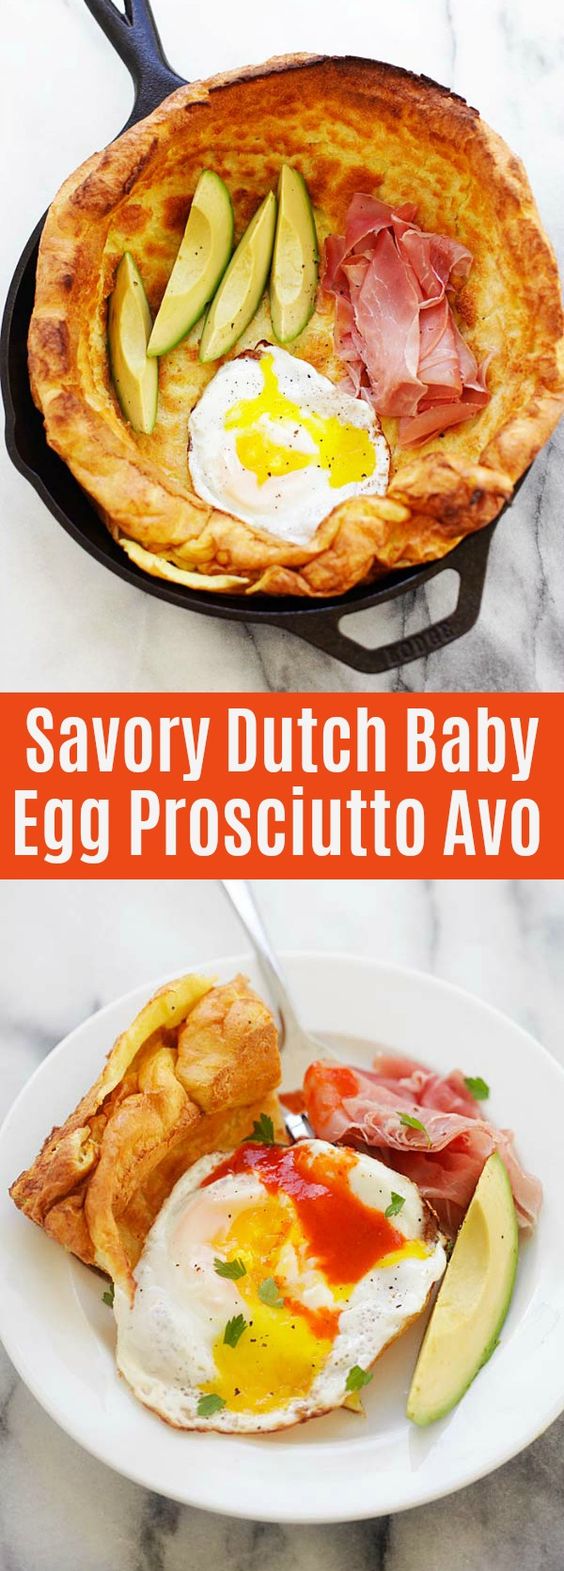 Savory Dutch Baby - this Savory Dutch Baby recipe is a cross between a Yorkshire pudding and a pancake with a trio of toppings of egg, prosciutto and avocado. An easy and delicious brunch | rasamalaysia.com